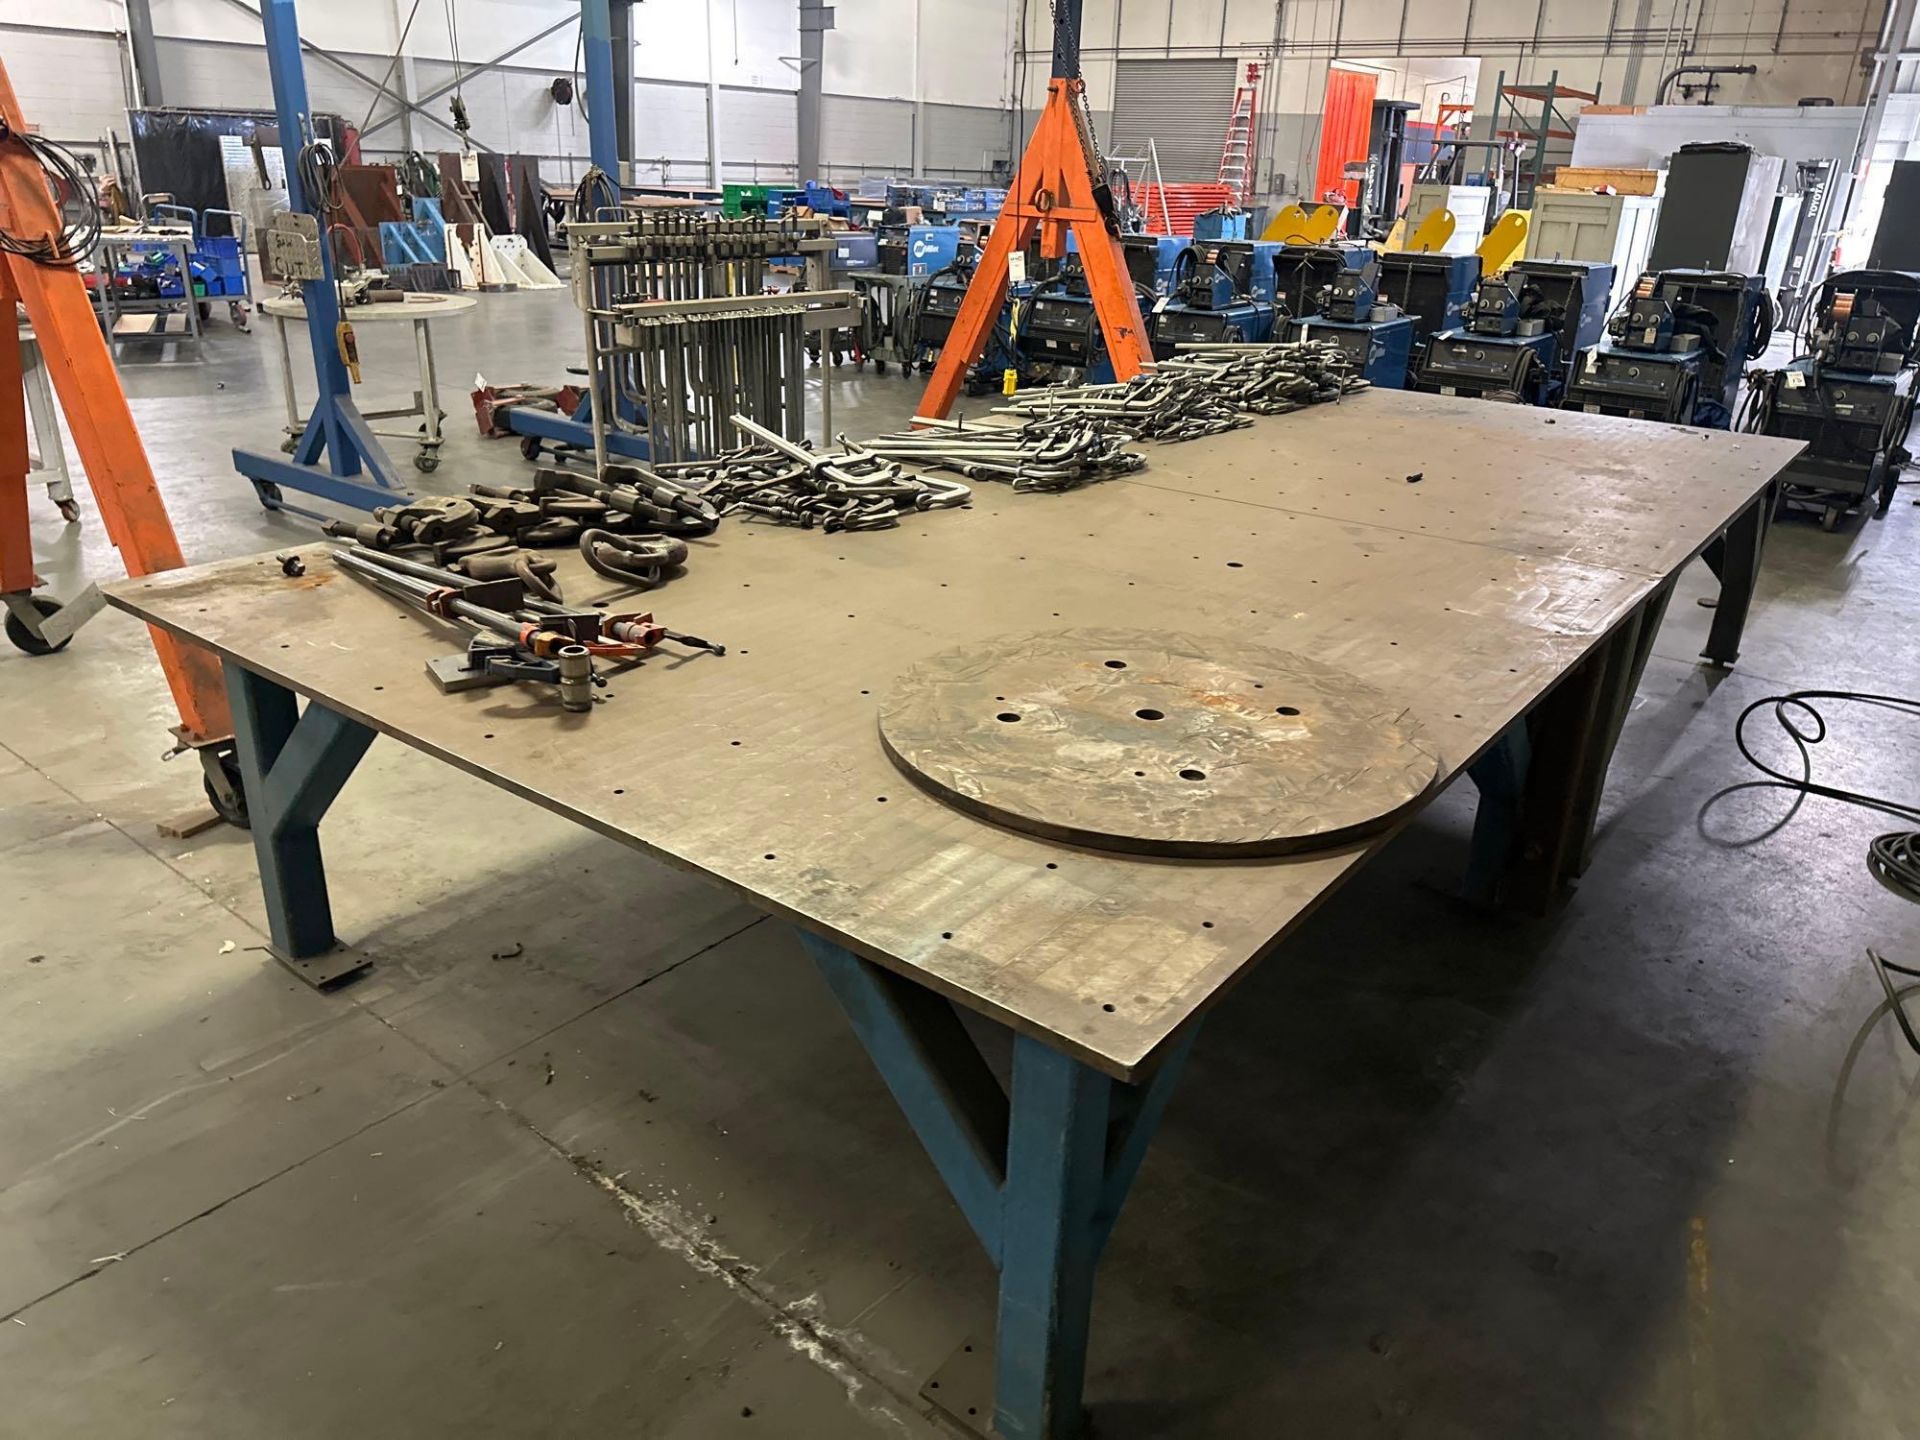 96”L x 192”W x 35”H Steel Welding Table *STEEL TABLE ONLY. CONTENTS NOT INCLUDED* - Image 3 of 4